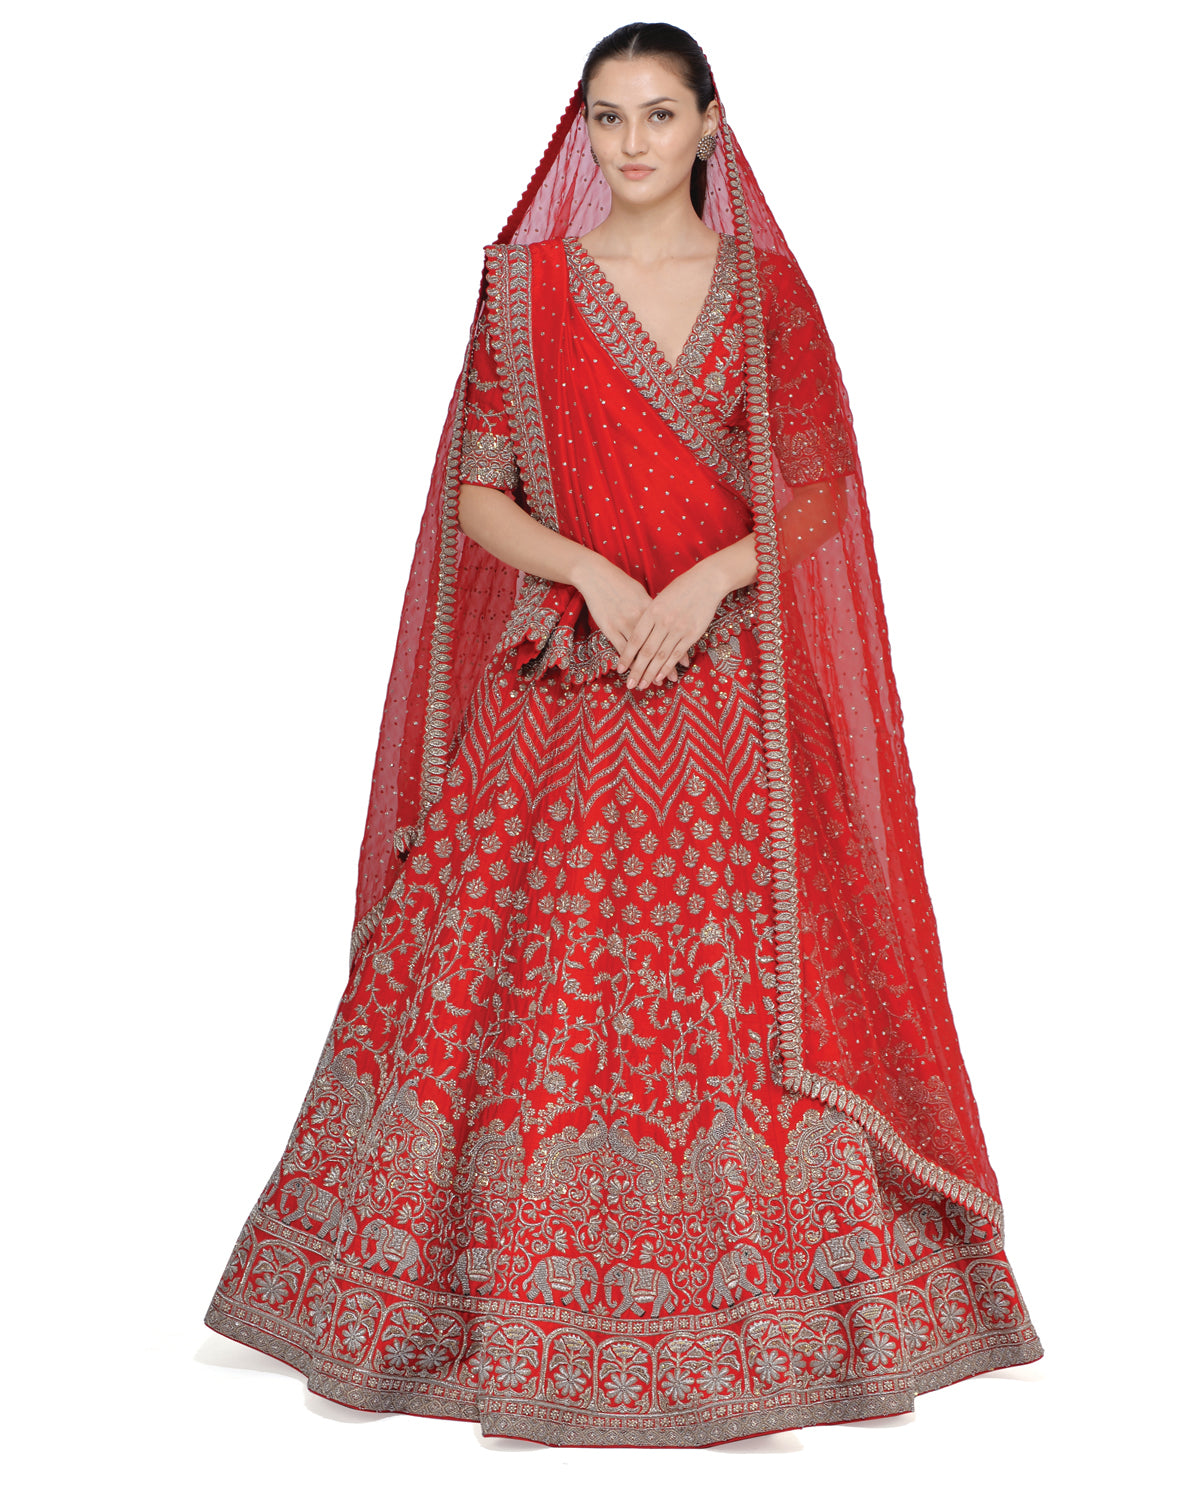 Red Zardozi Embroidered Lehenga with Floral Blouse by Mrunalini Rao at KYNAH